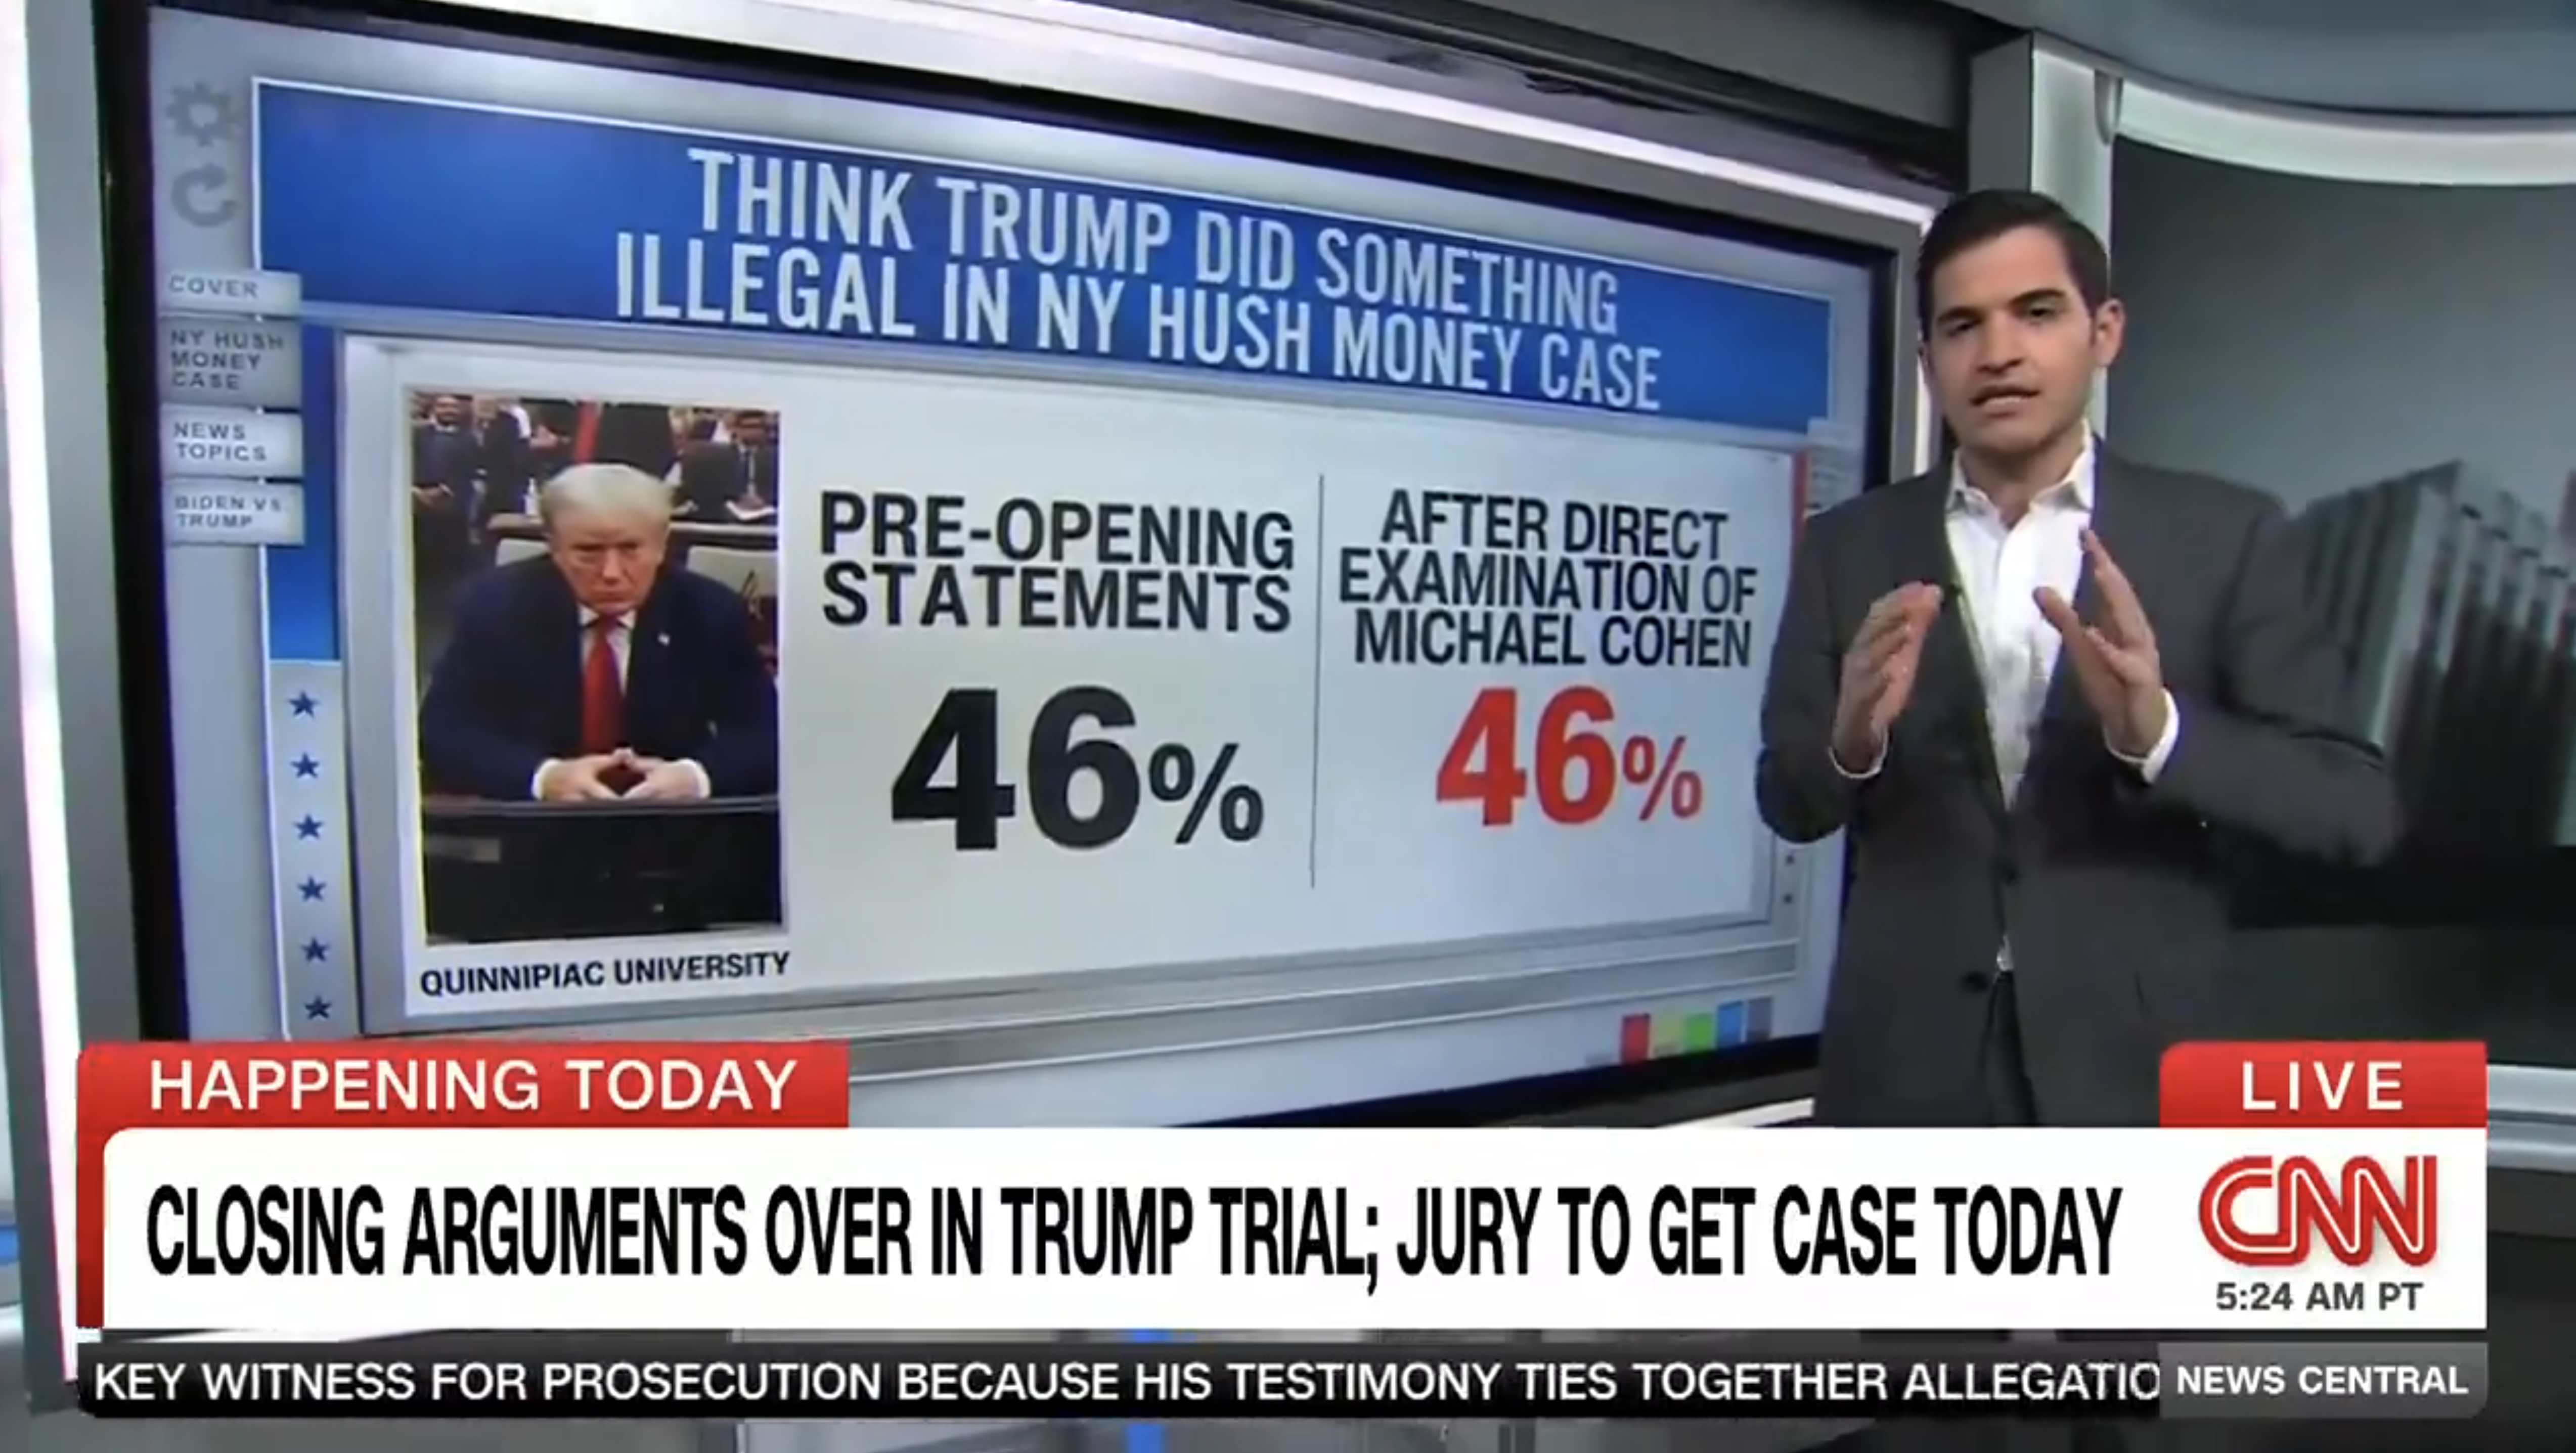 Leading CNN Data Analyst: Trump’s Trial Shows No Impact on His Poll Numbers